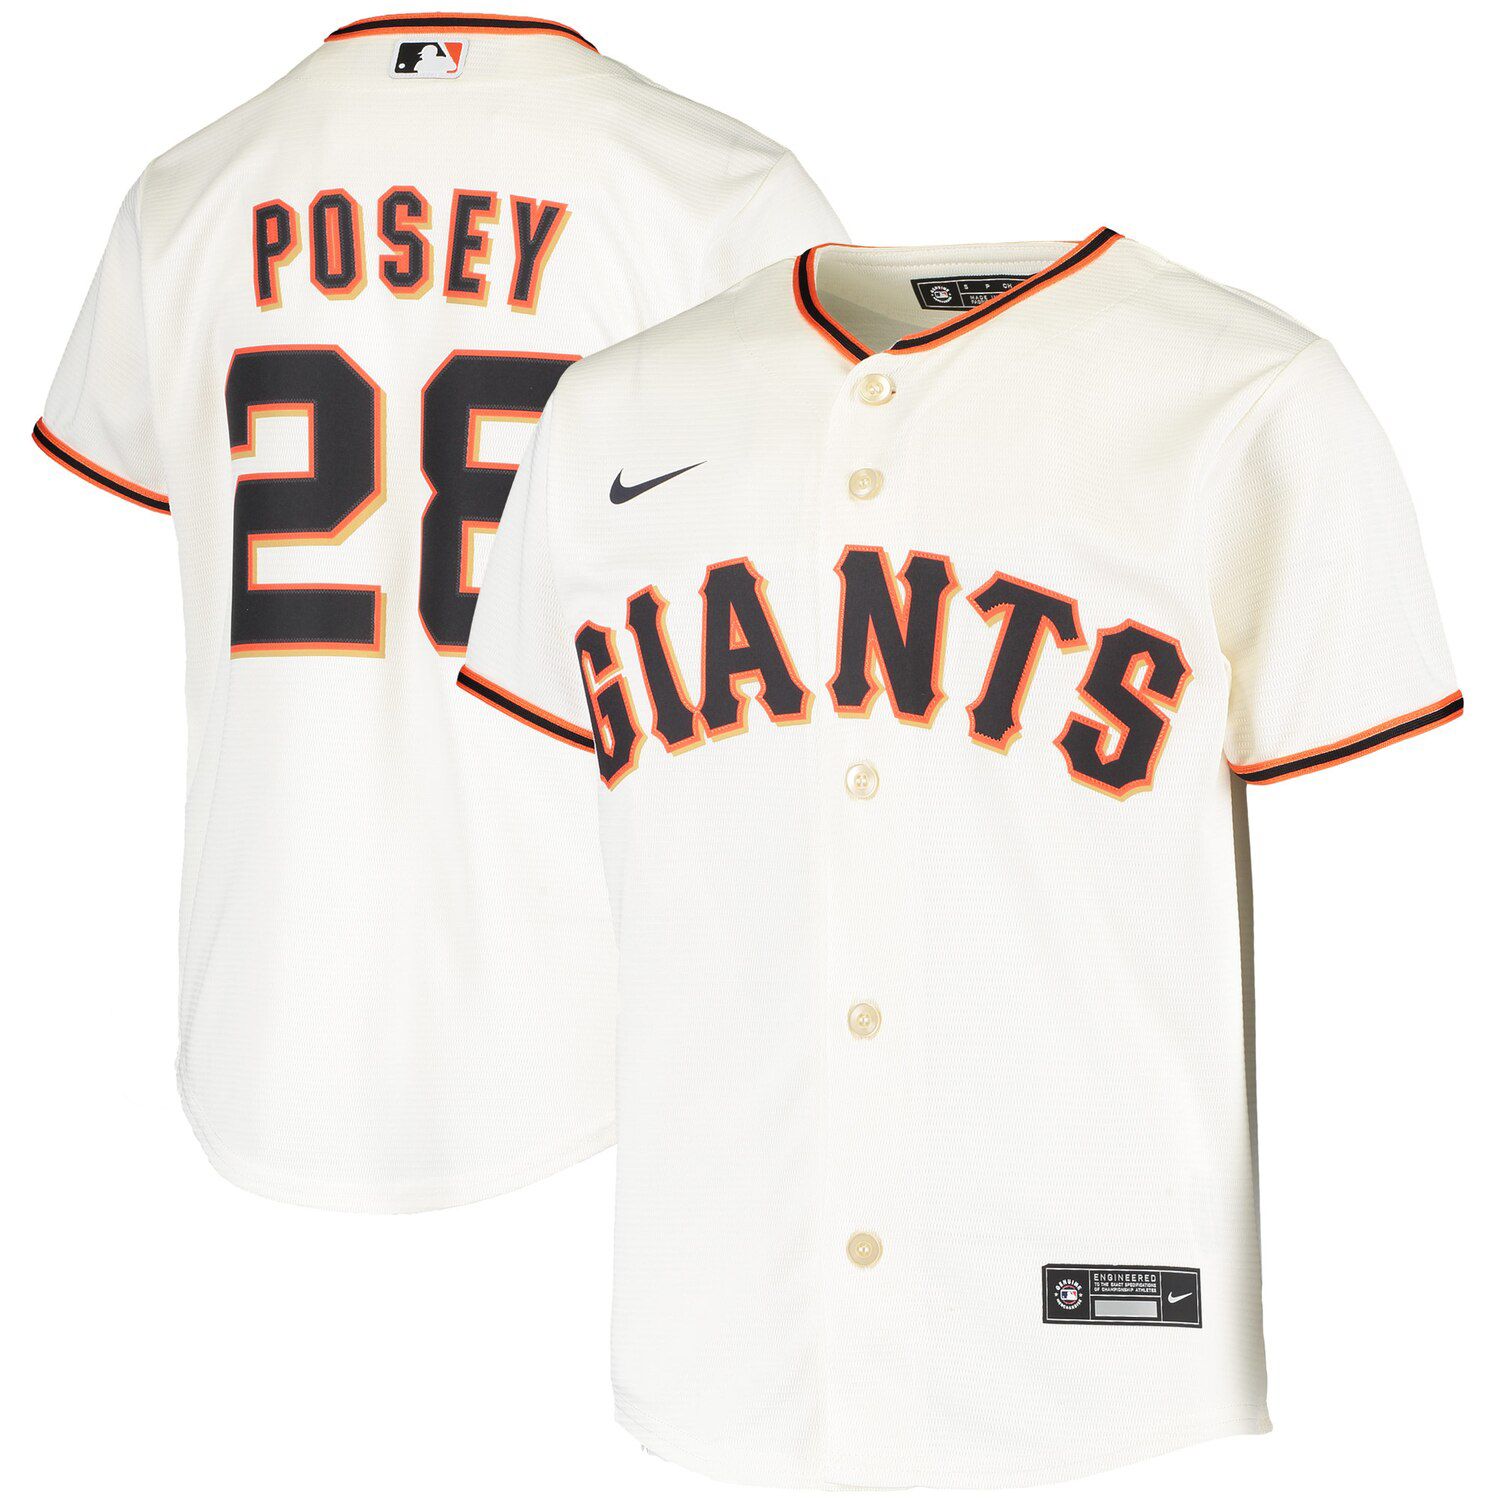 buster posey jerseys